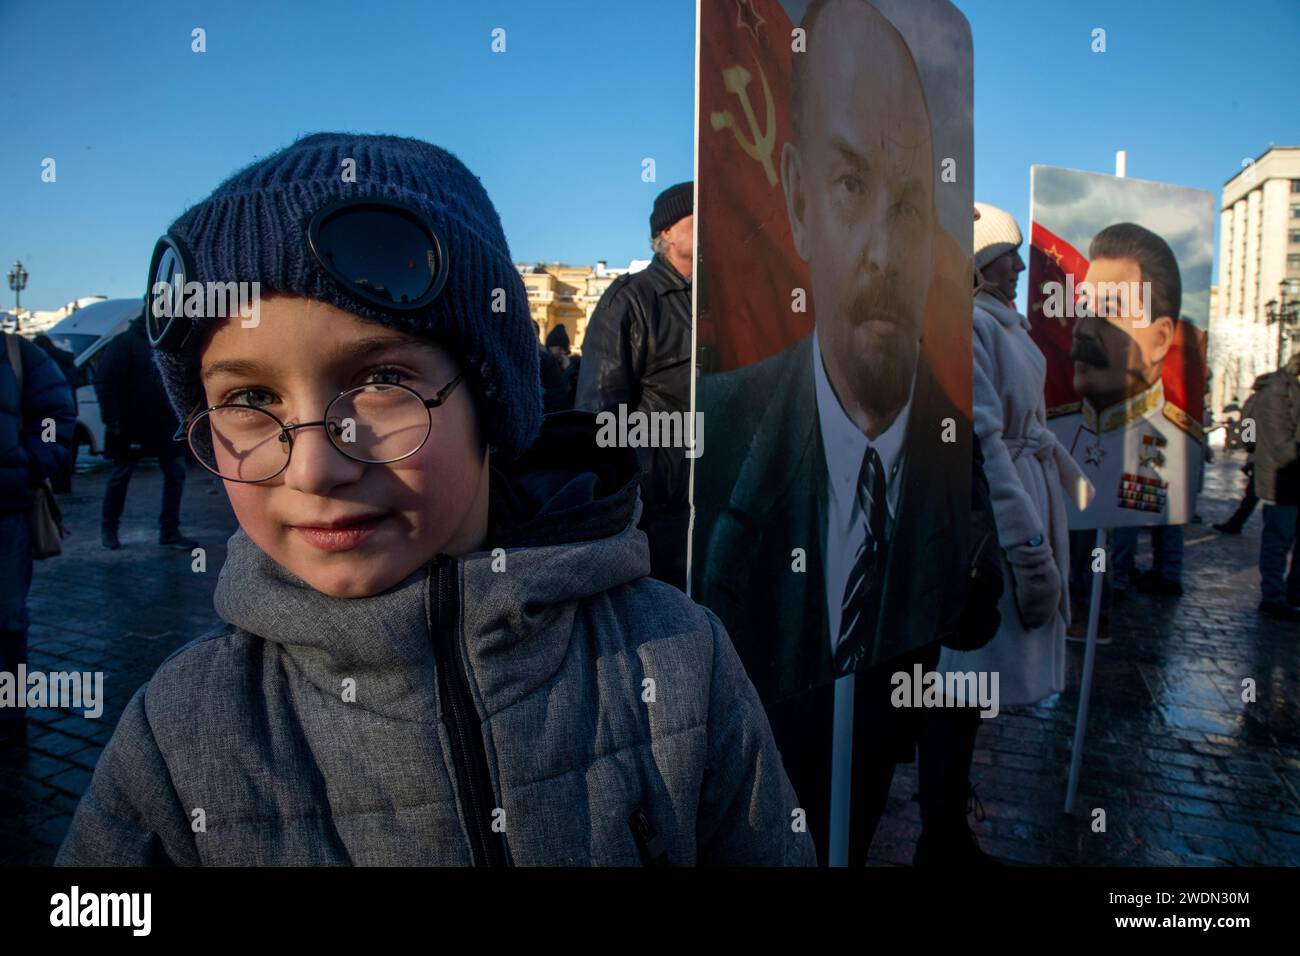 Moscow, Russia. 21st of January, 2024. Russian Communist supporters carry portraits of Vladimir Lenin and Joseph Stalin as they walk to lay flowers at the Mausoleum of the Soviet founder Vladimir Lenin to mark the 100th anniversary of his death, in Red Square, Moscow, Russia. Credit: Nikolay Vinokurov/Alamy Live News Stock Photo